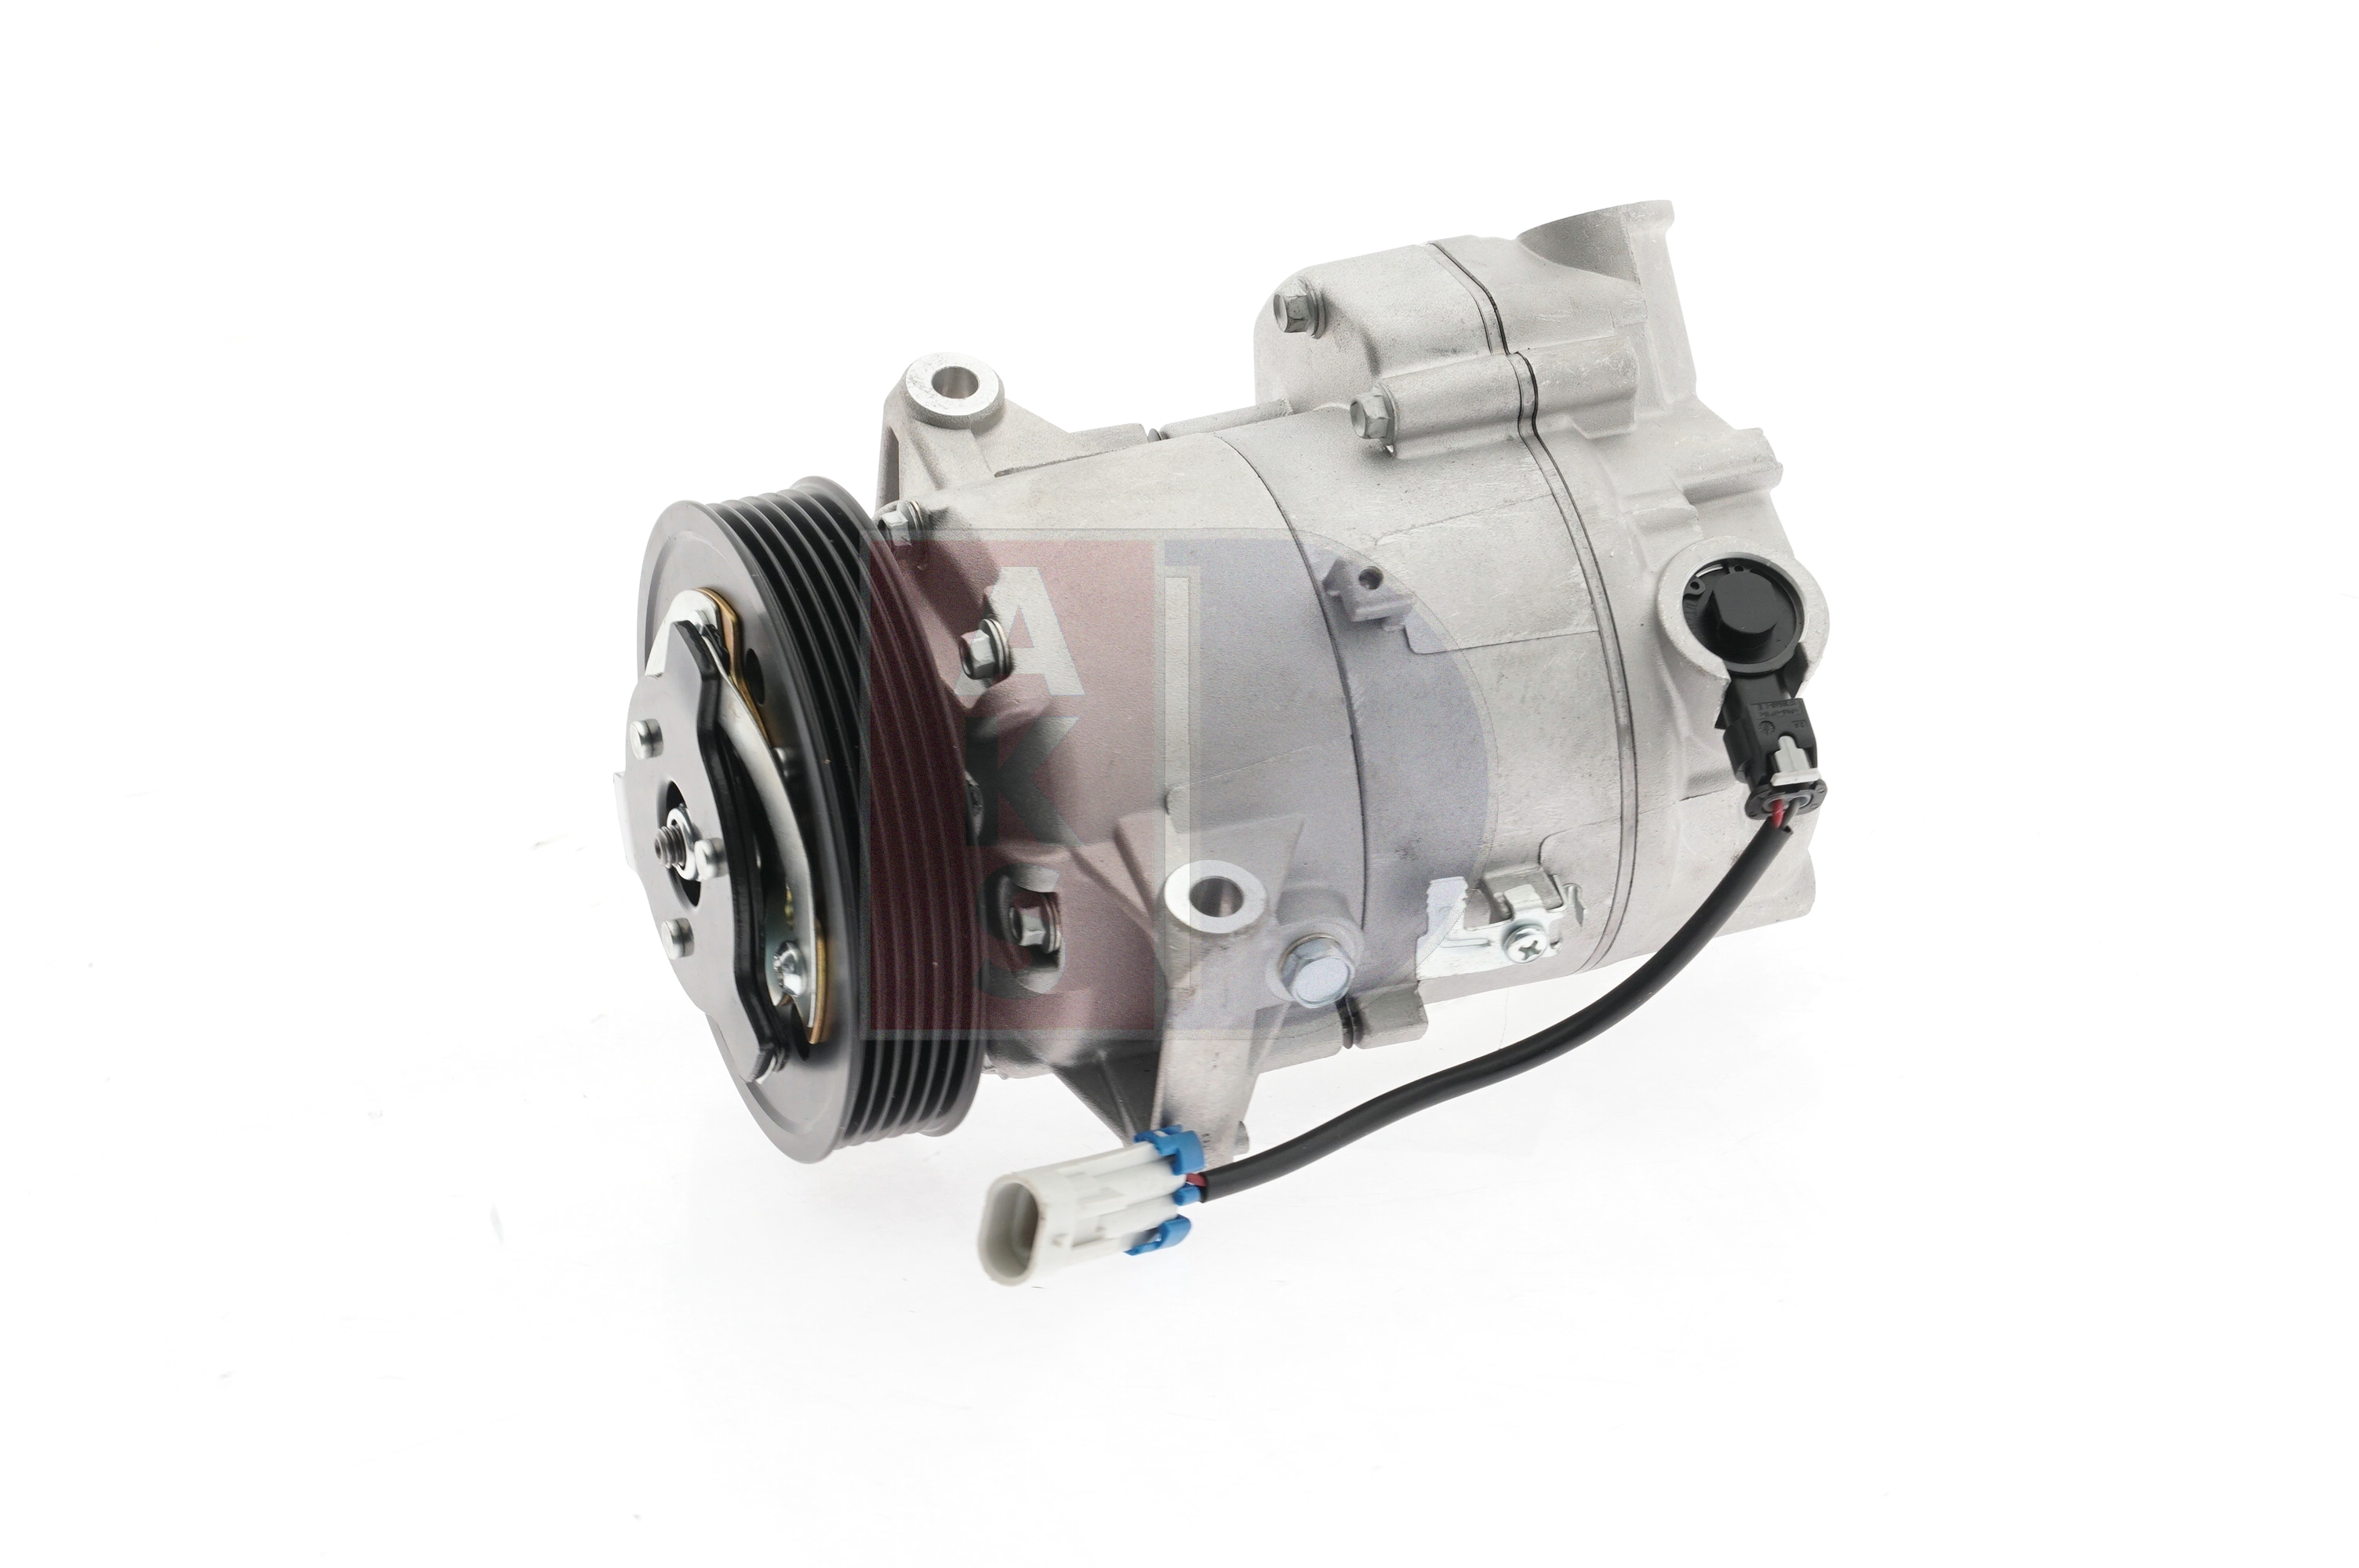 AKS DASIS 851974N Air conditioning compressor PXE16-1605F